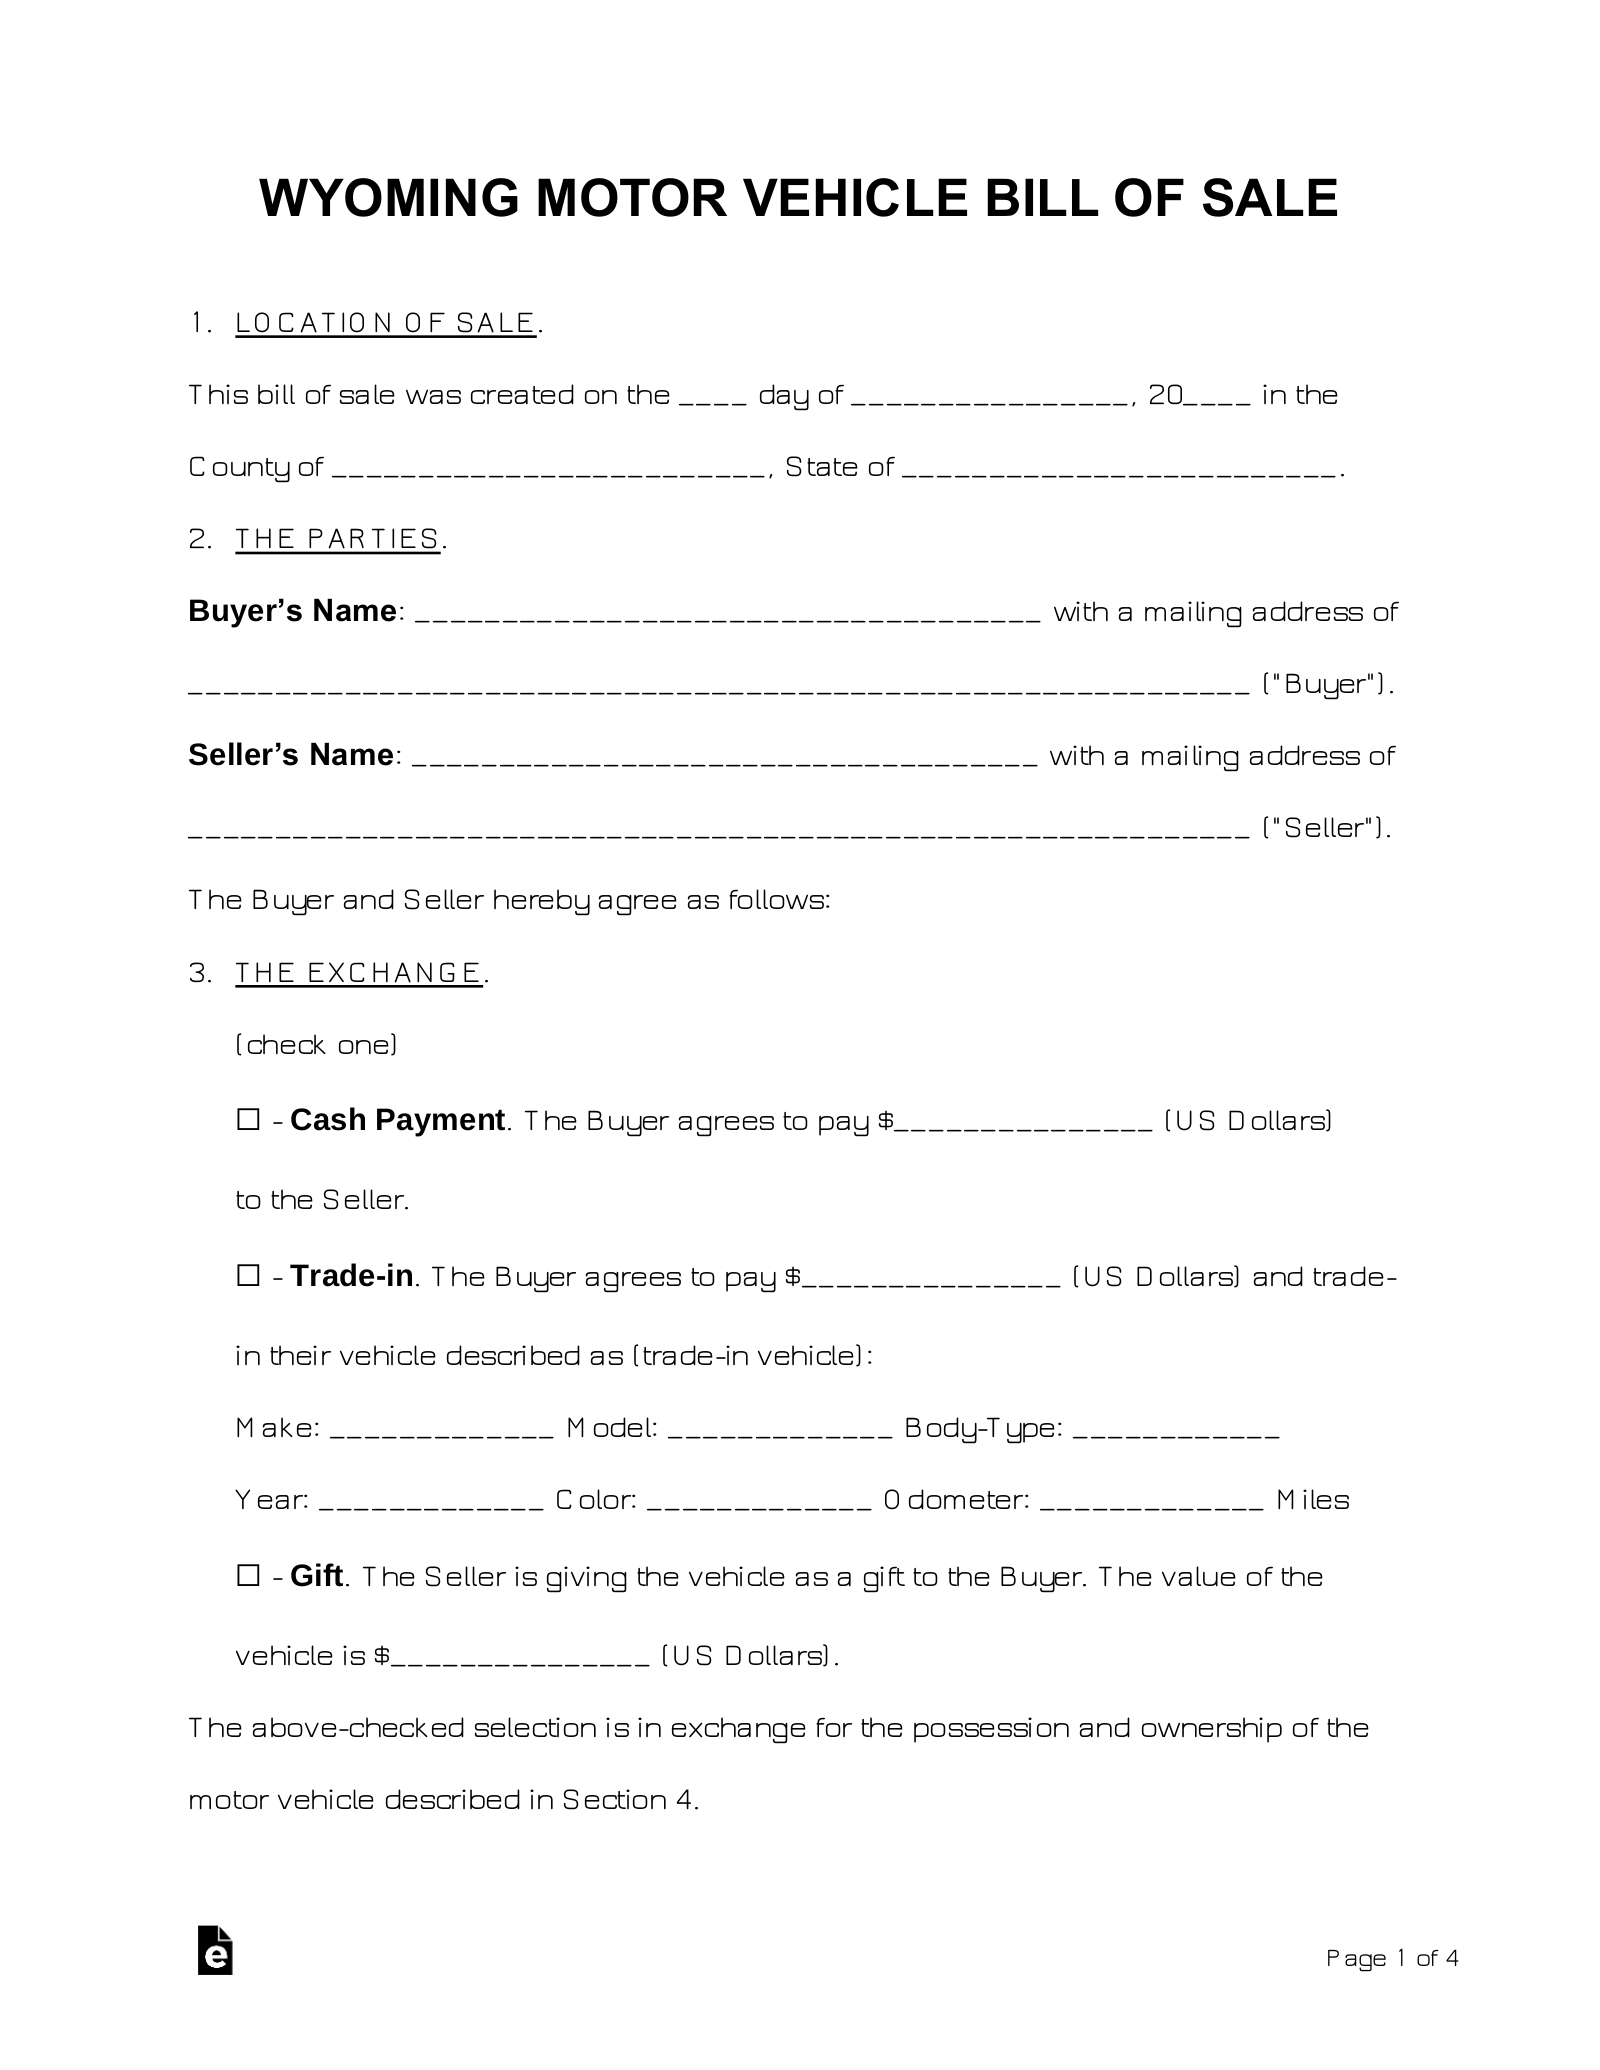 Wyoming Bill of Sale Forms (4)